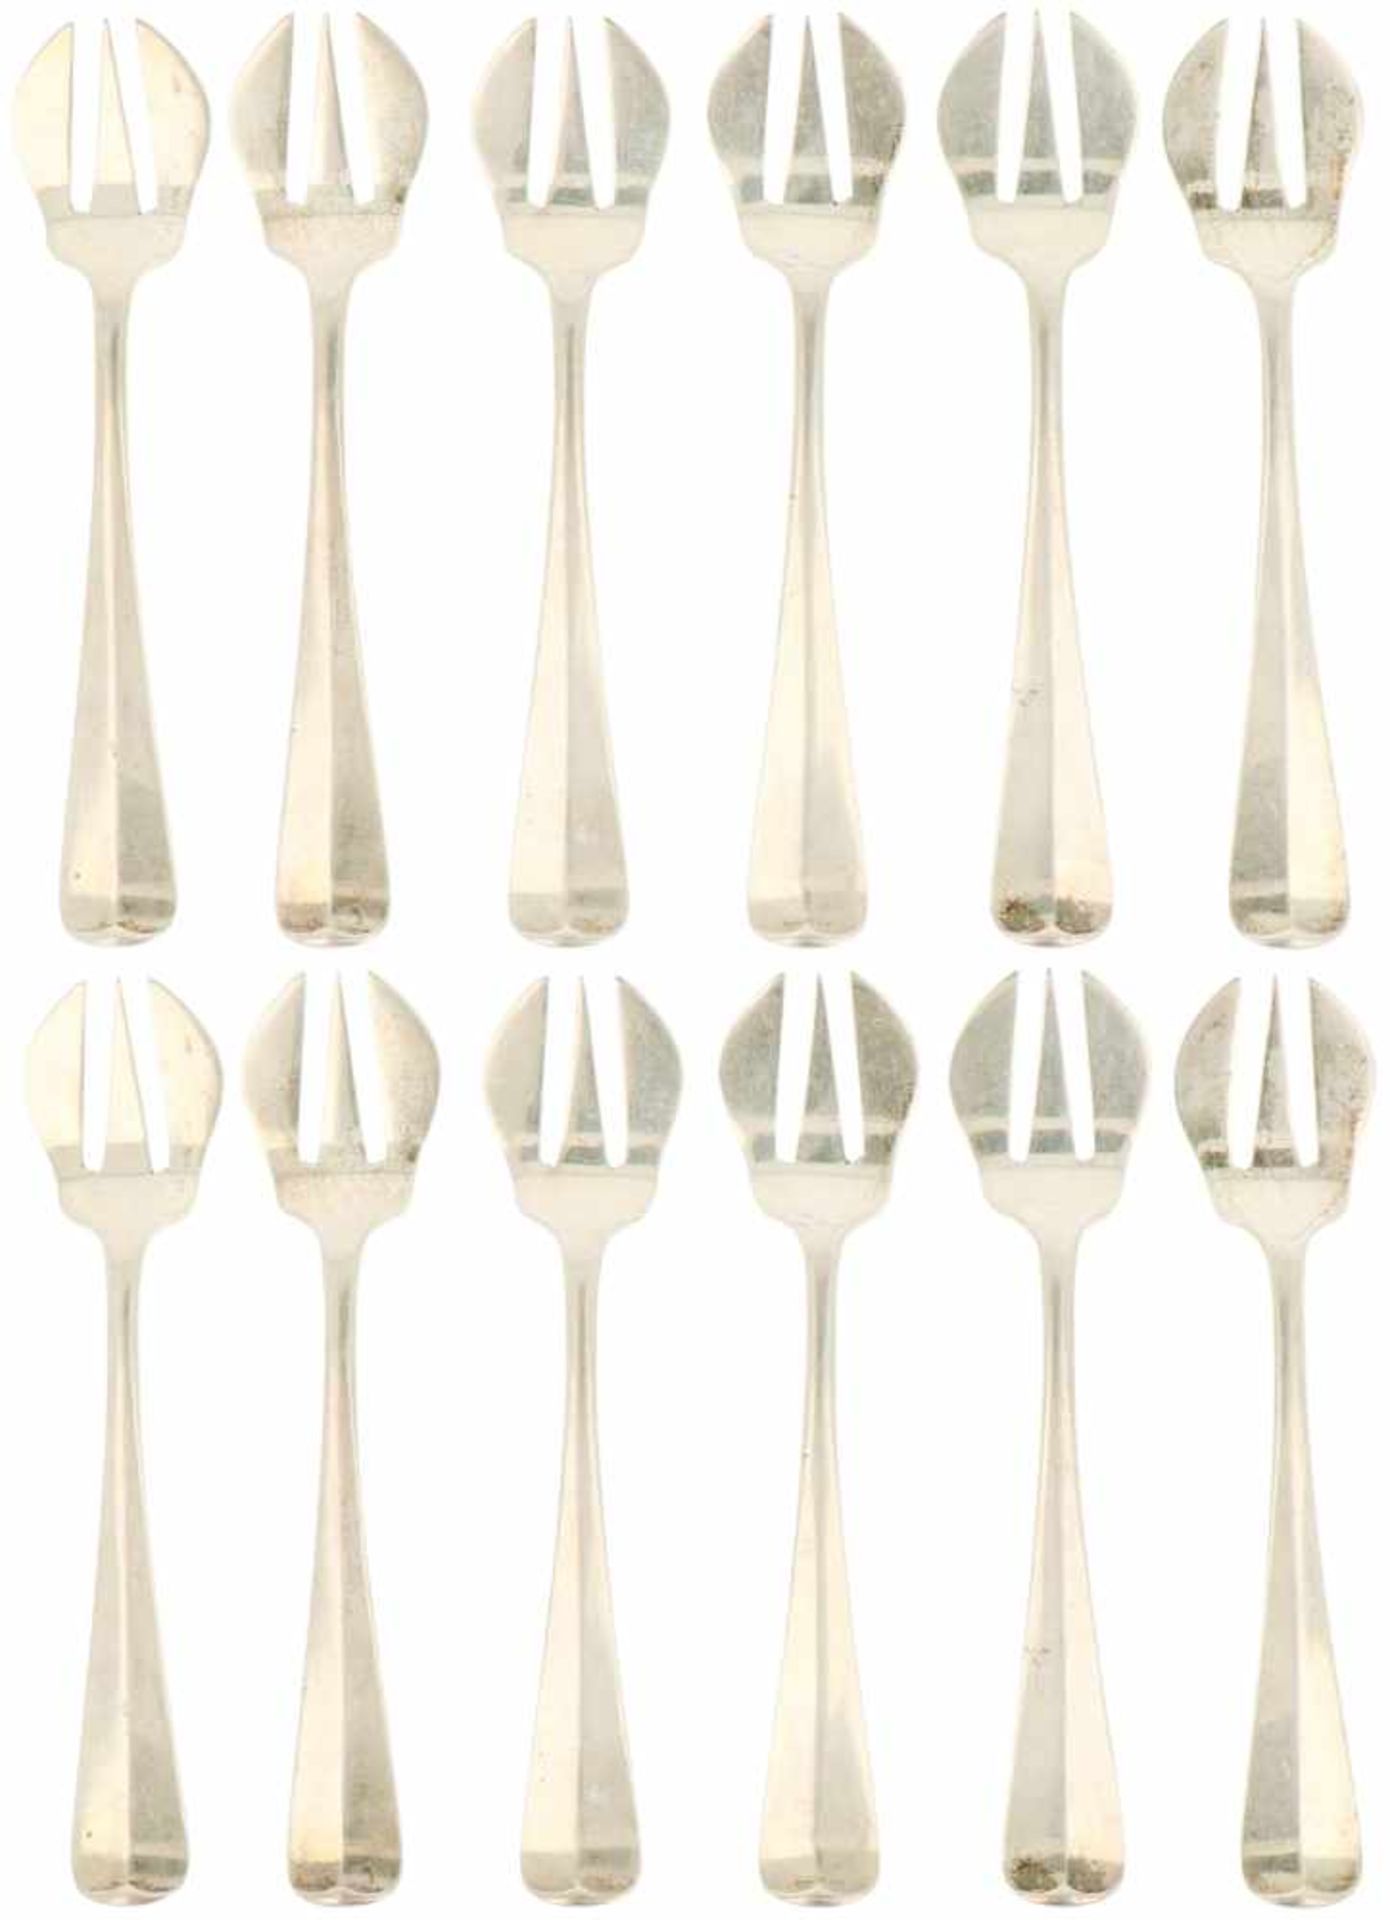 (12) Piece set of silver oyster forks.